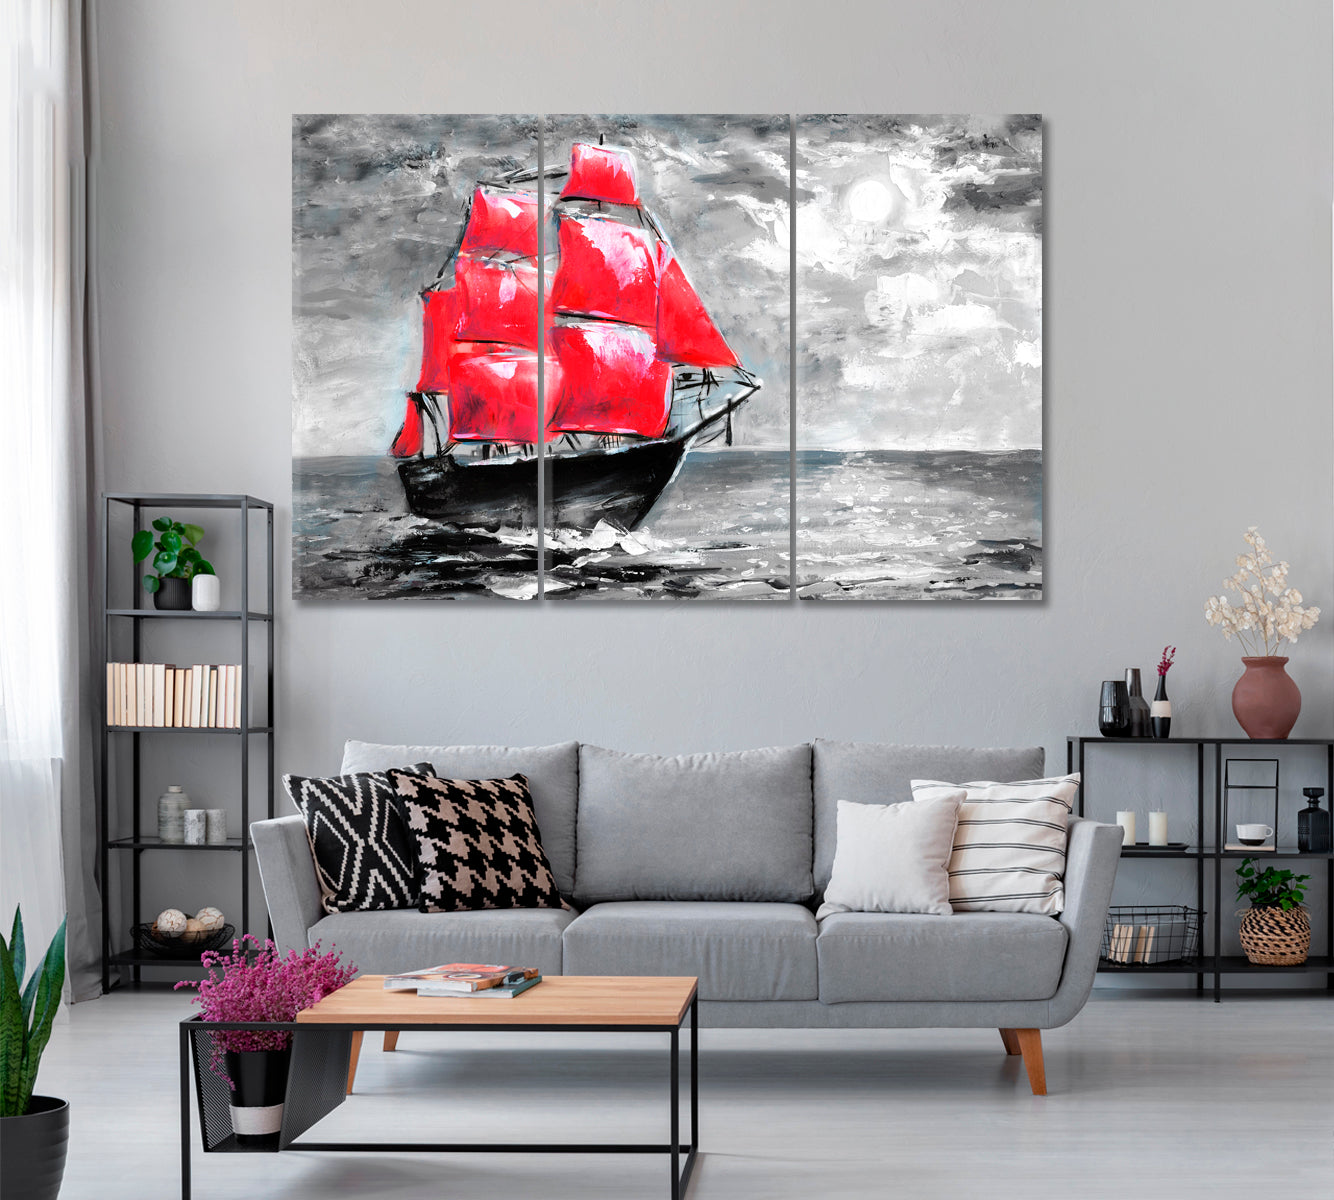 Scarlet Sails Canvas Print ArtLexy 3 Panels 36"x24" inches 